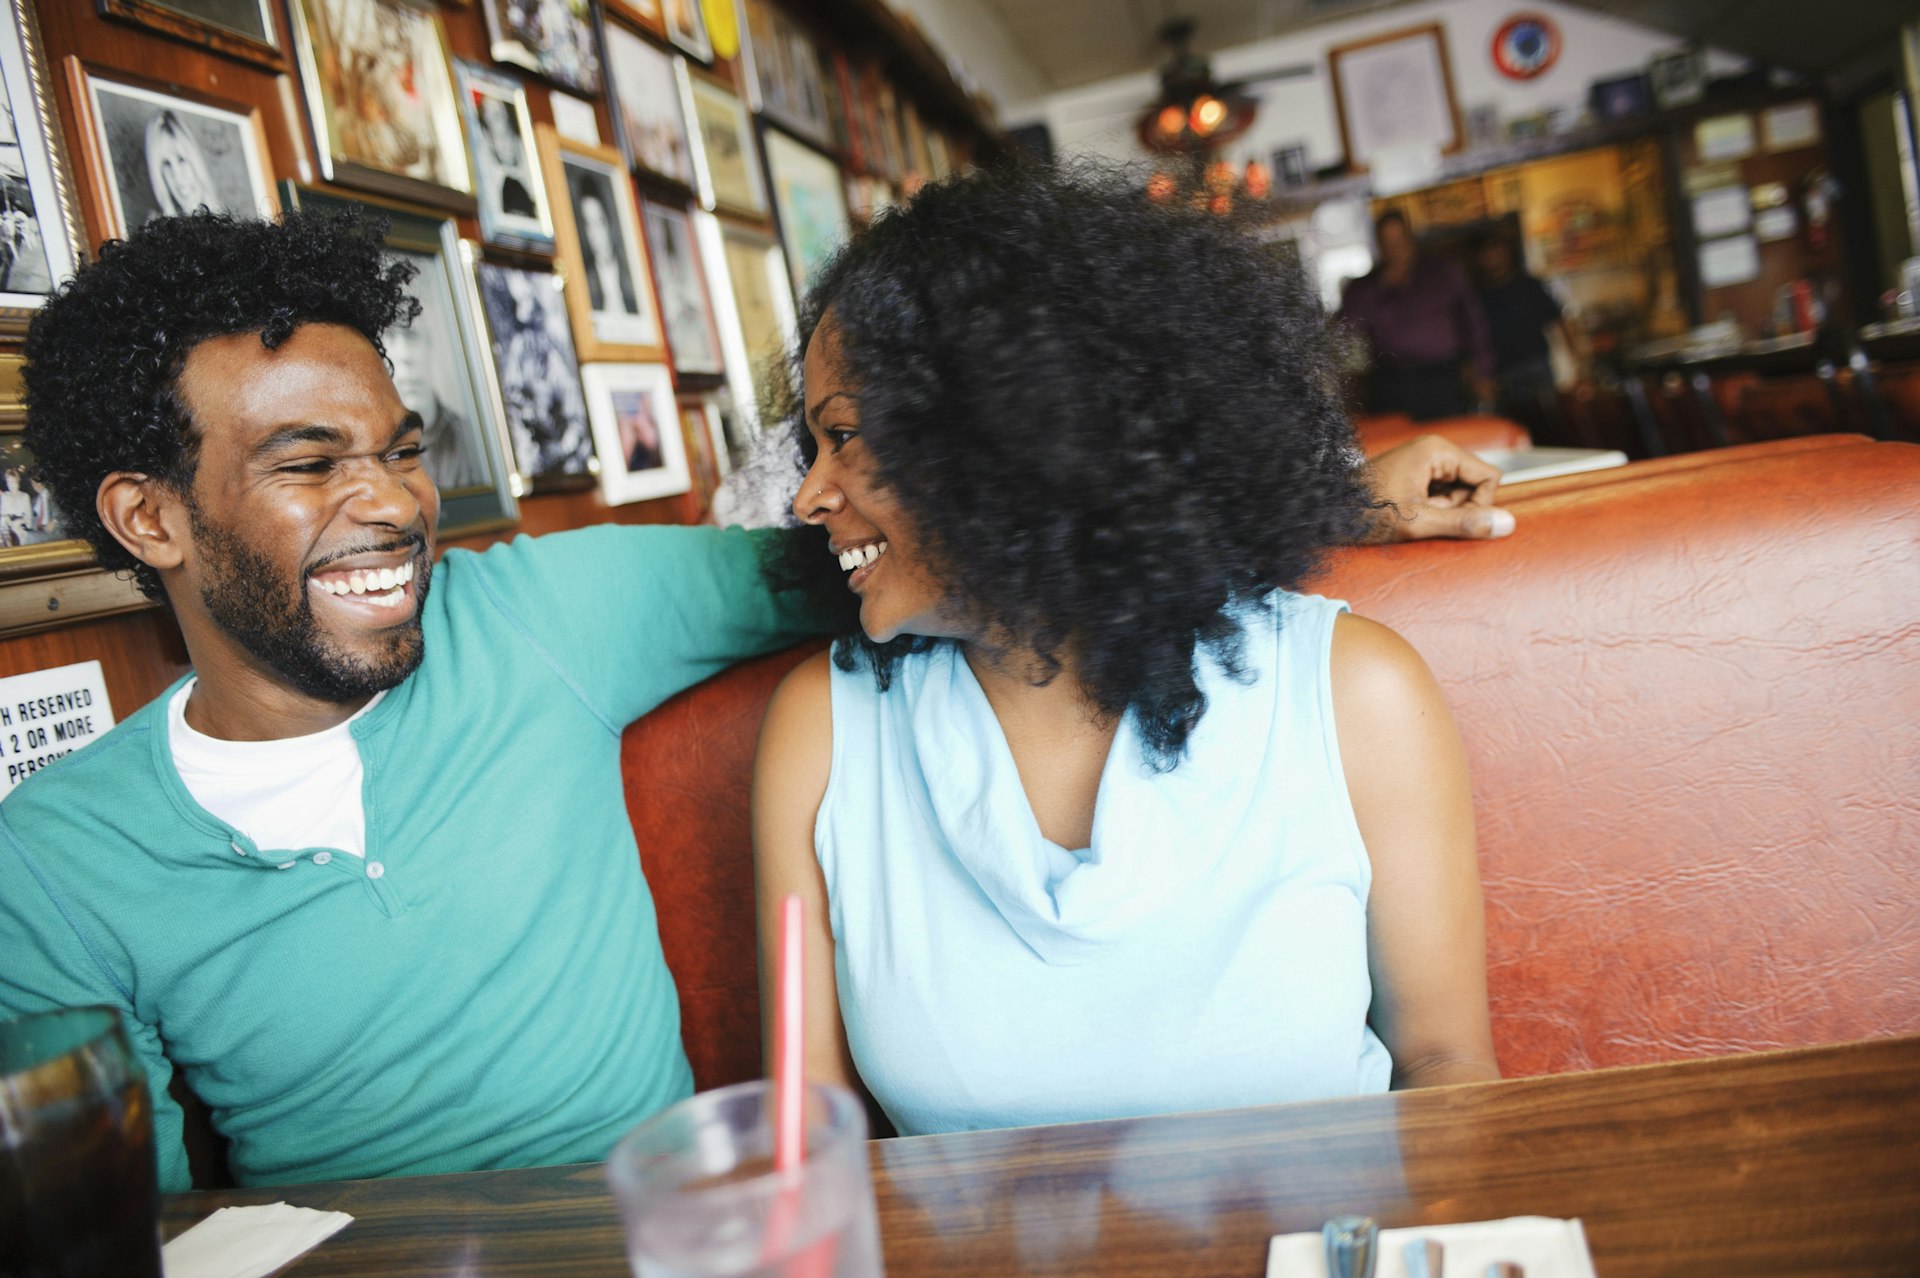 A couple smiling at each other in a booth at a restaurant in California